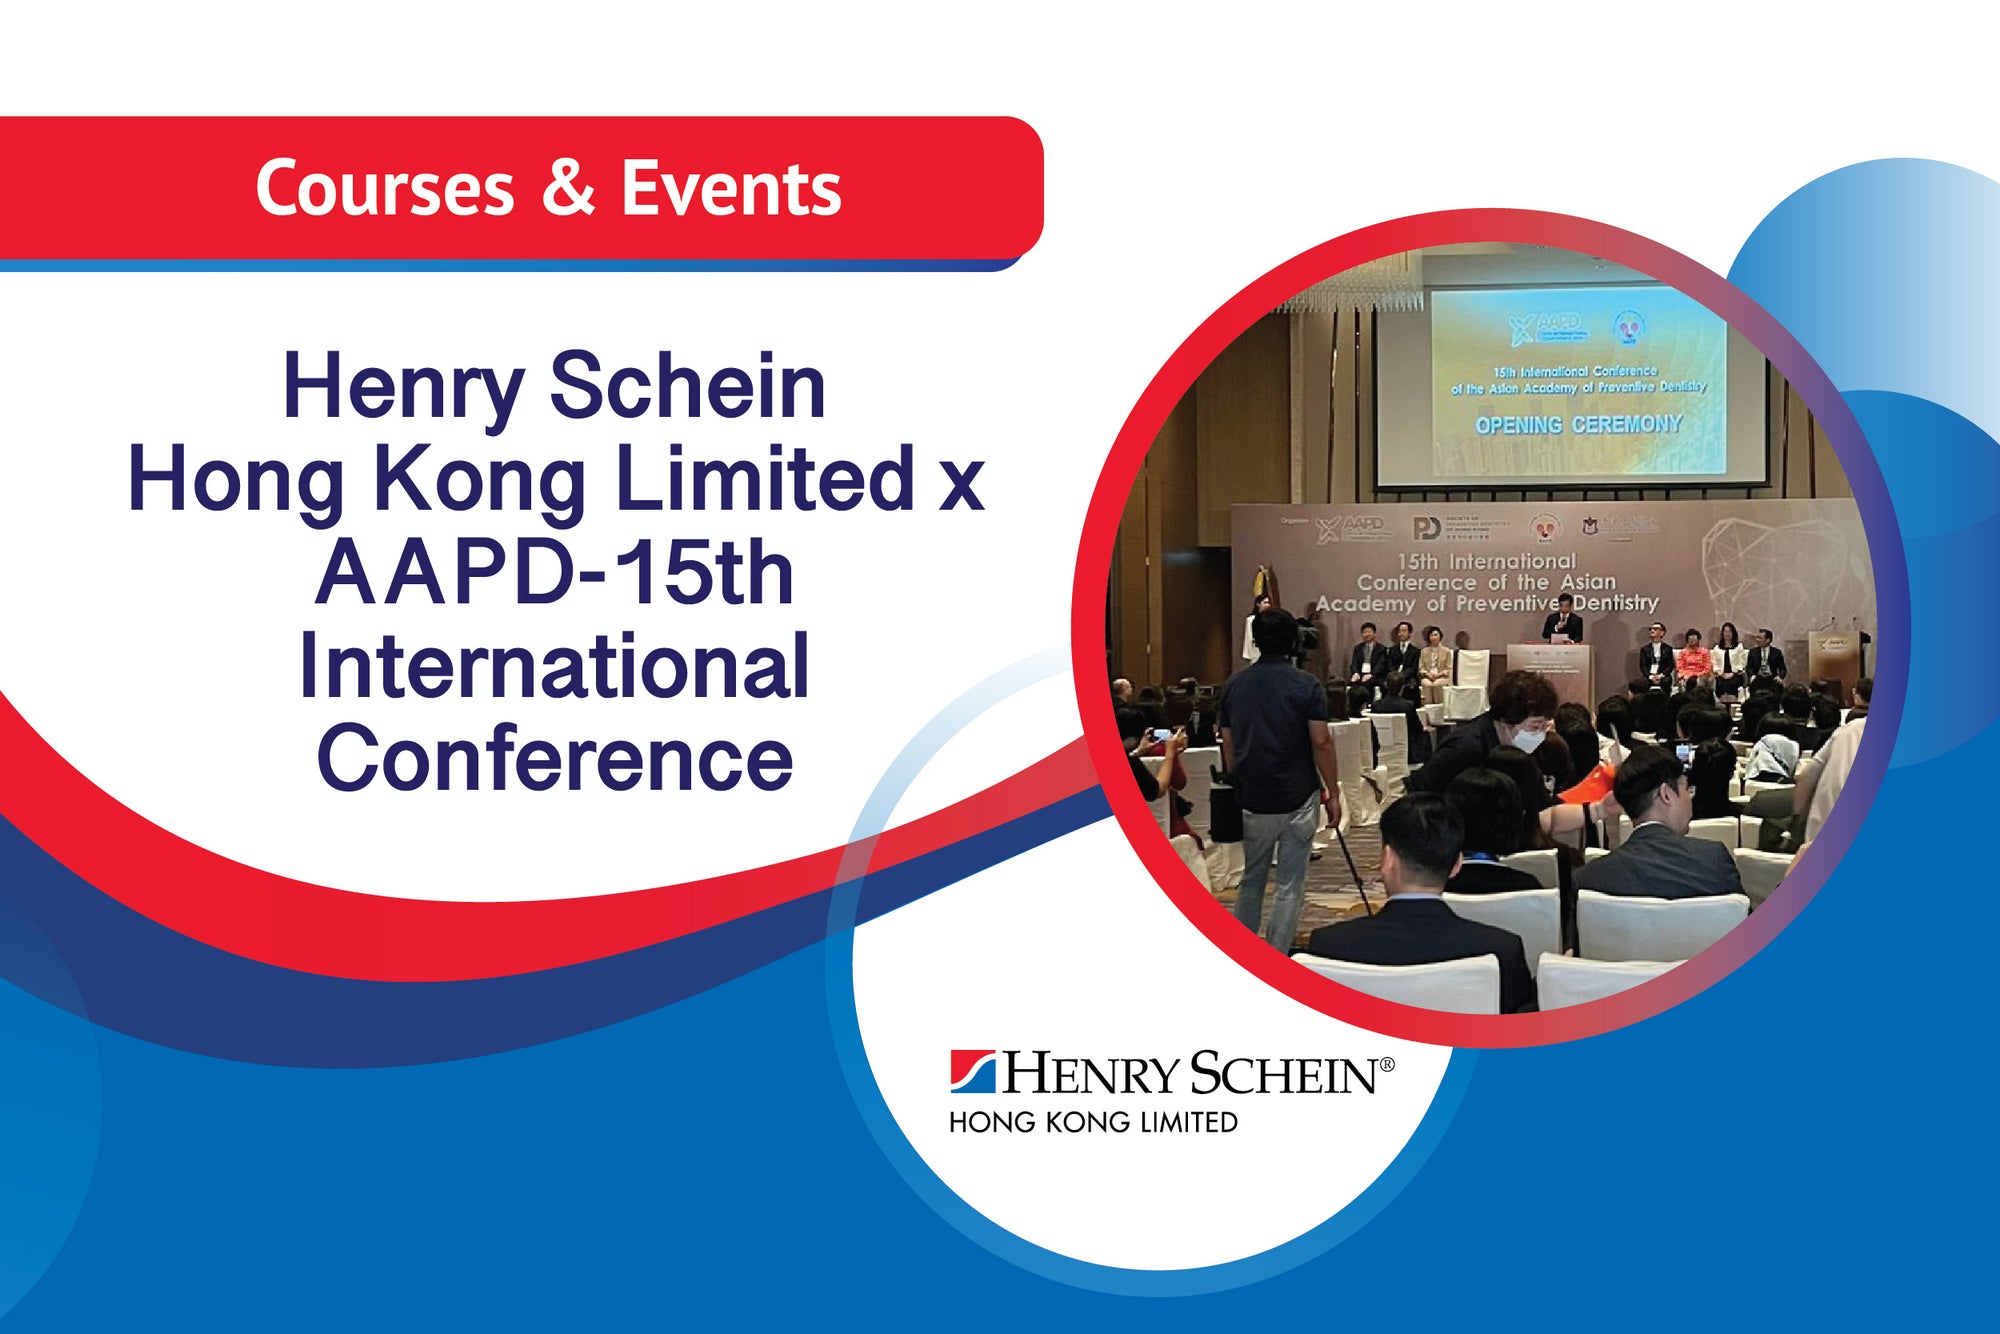 Henry Schein Successfully Showcases Innovative Dental Products at AAPD-15th International Conference